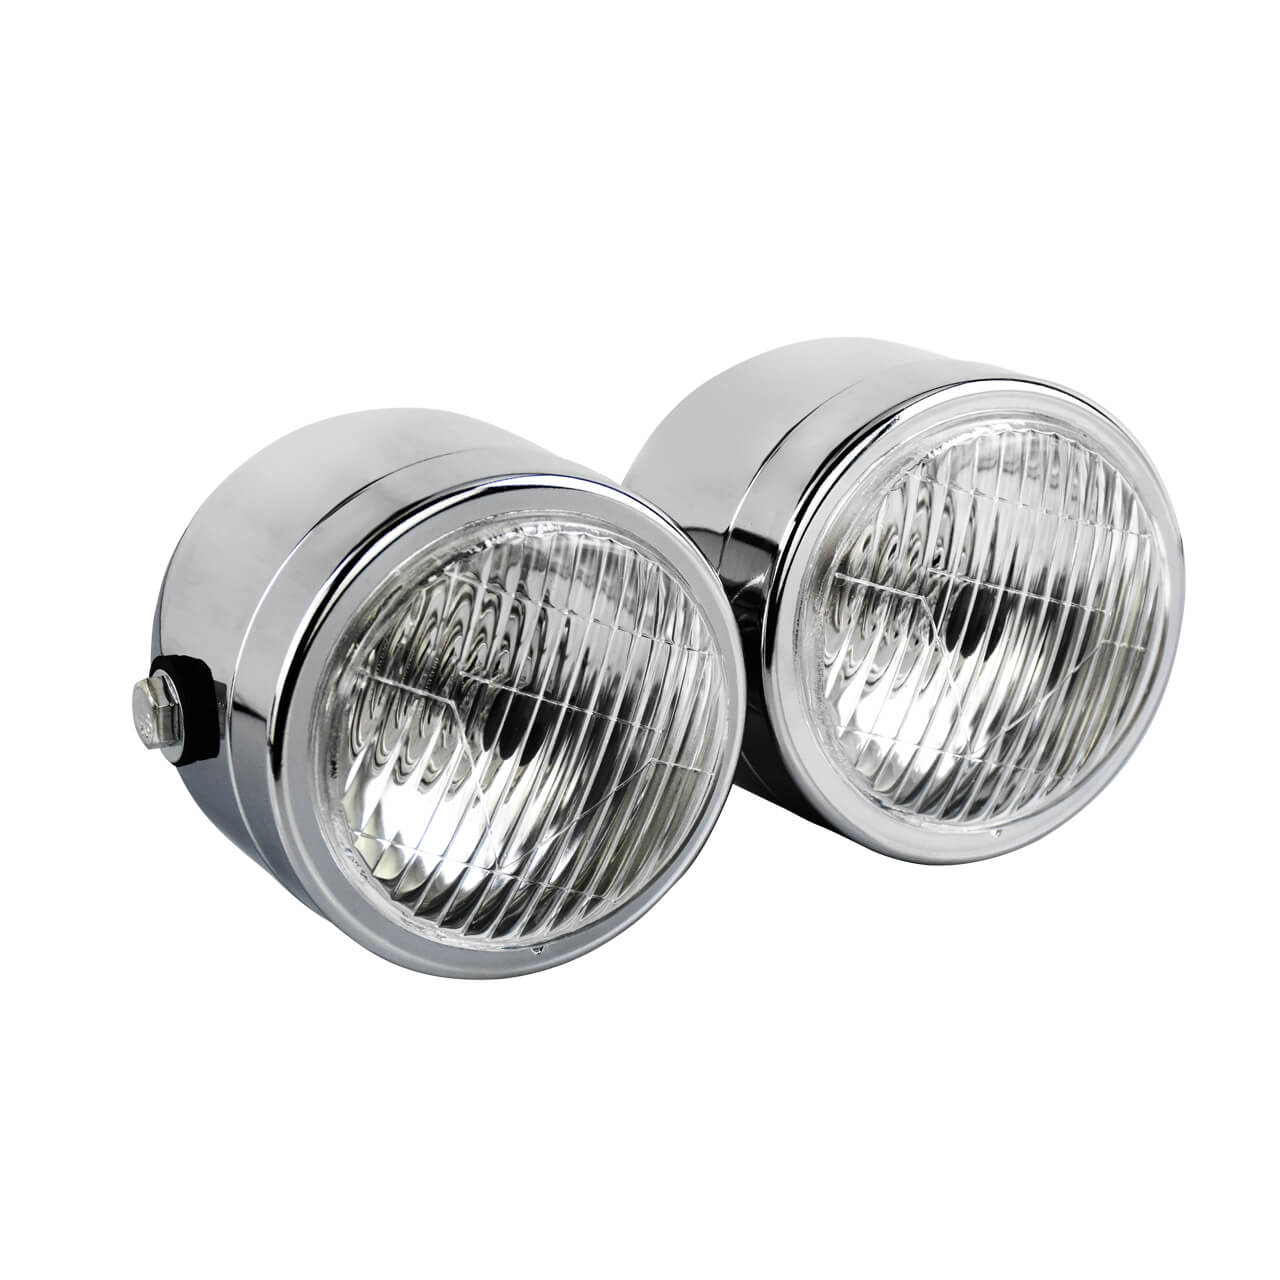 3.5in-twin-headlight-with-clear-lens-LA003702